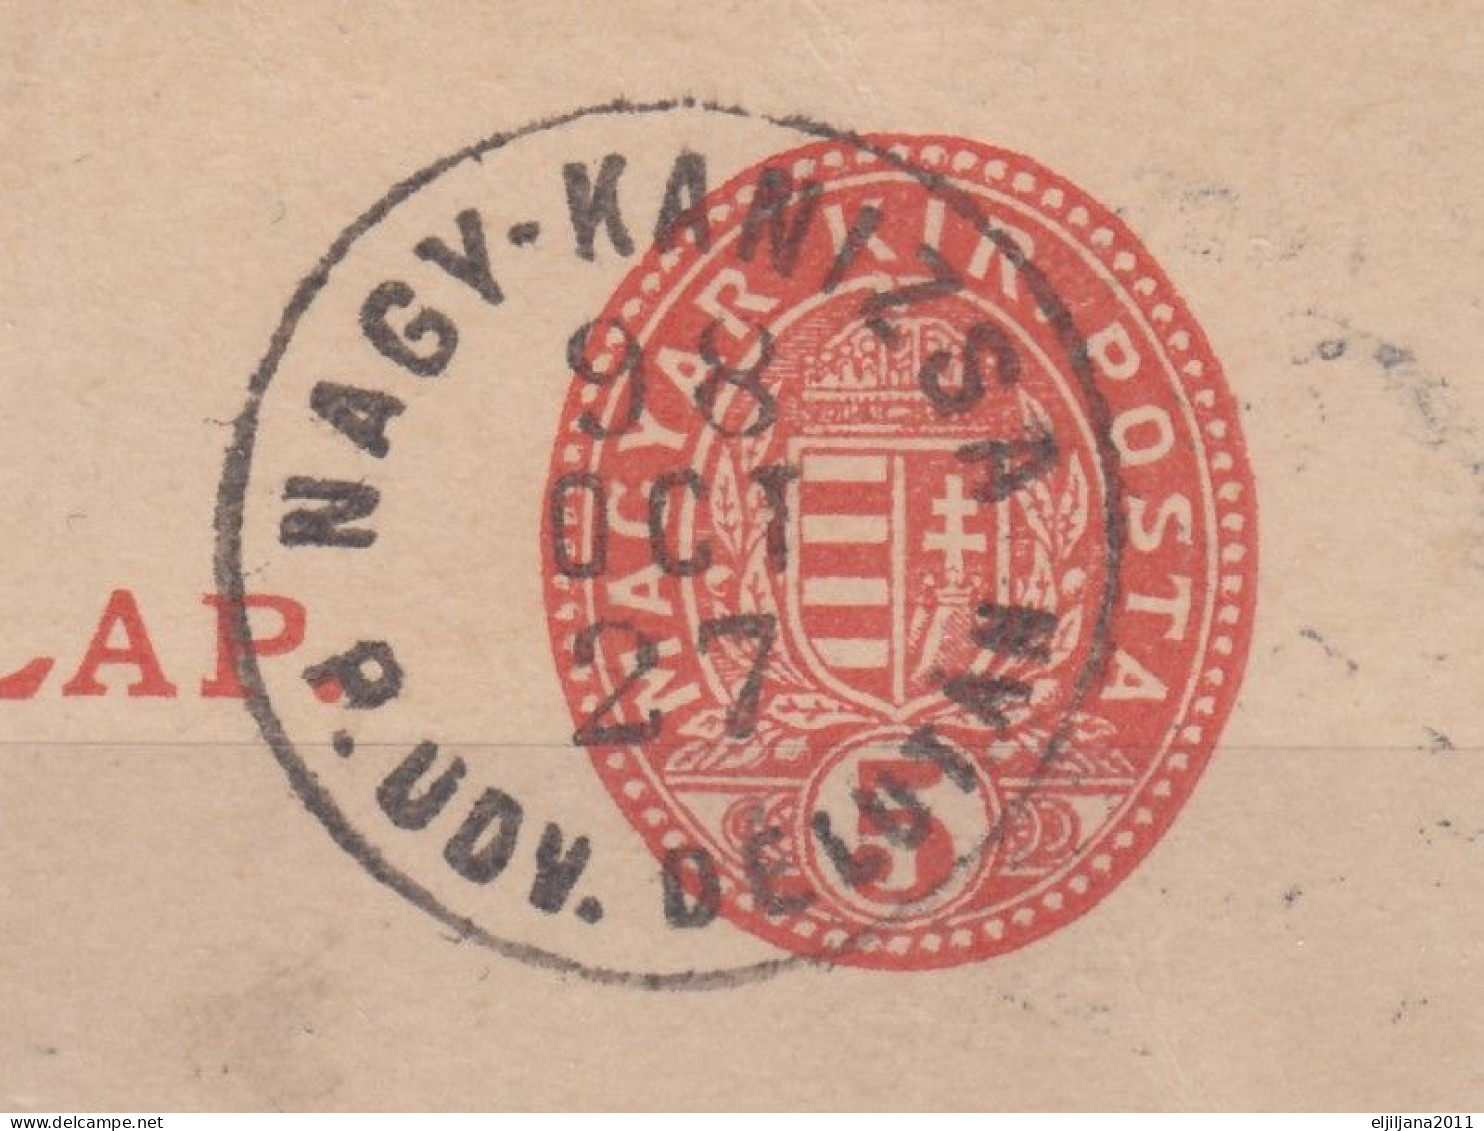 ⁕ Hungary / Ungarn / Magyar Posta ⁕ Collection / Lot - Postmark / Used On Paper - See All Scan - Postmark Collection